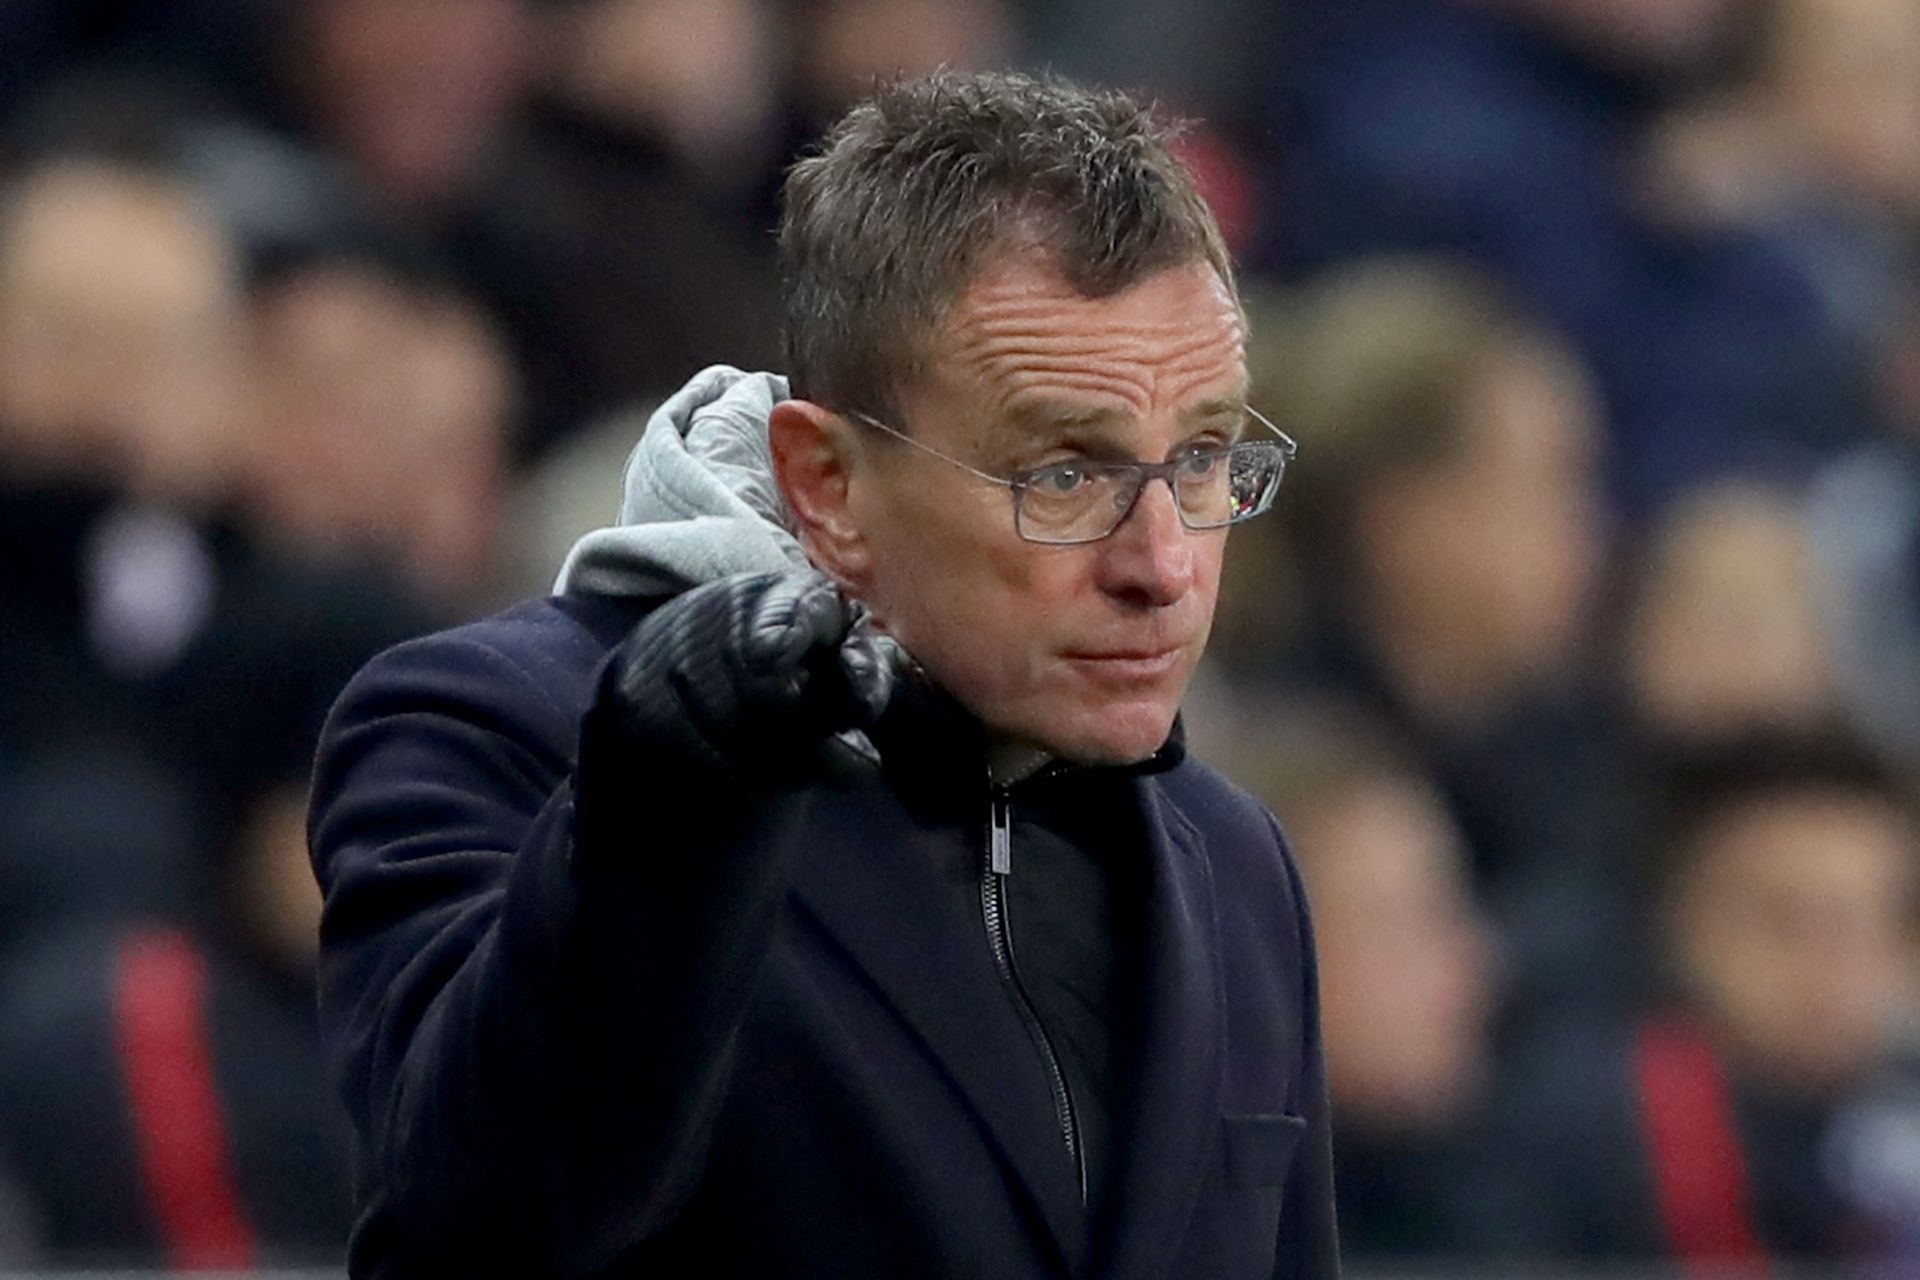 Ralf Rangnick is likely to have a long-term role to play at Manchester United